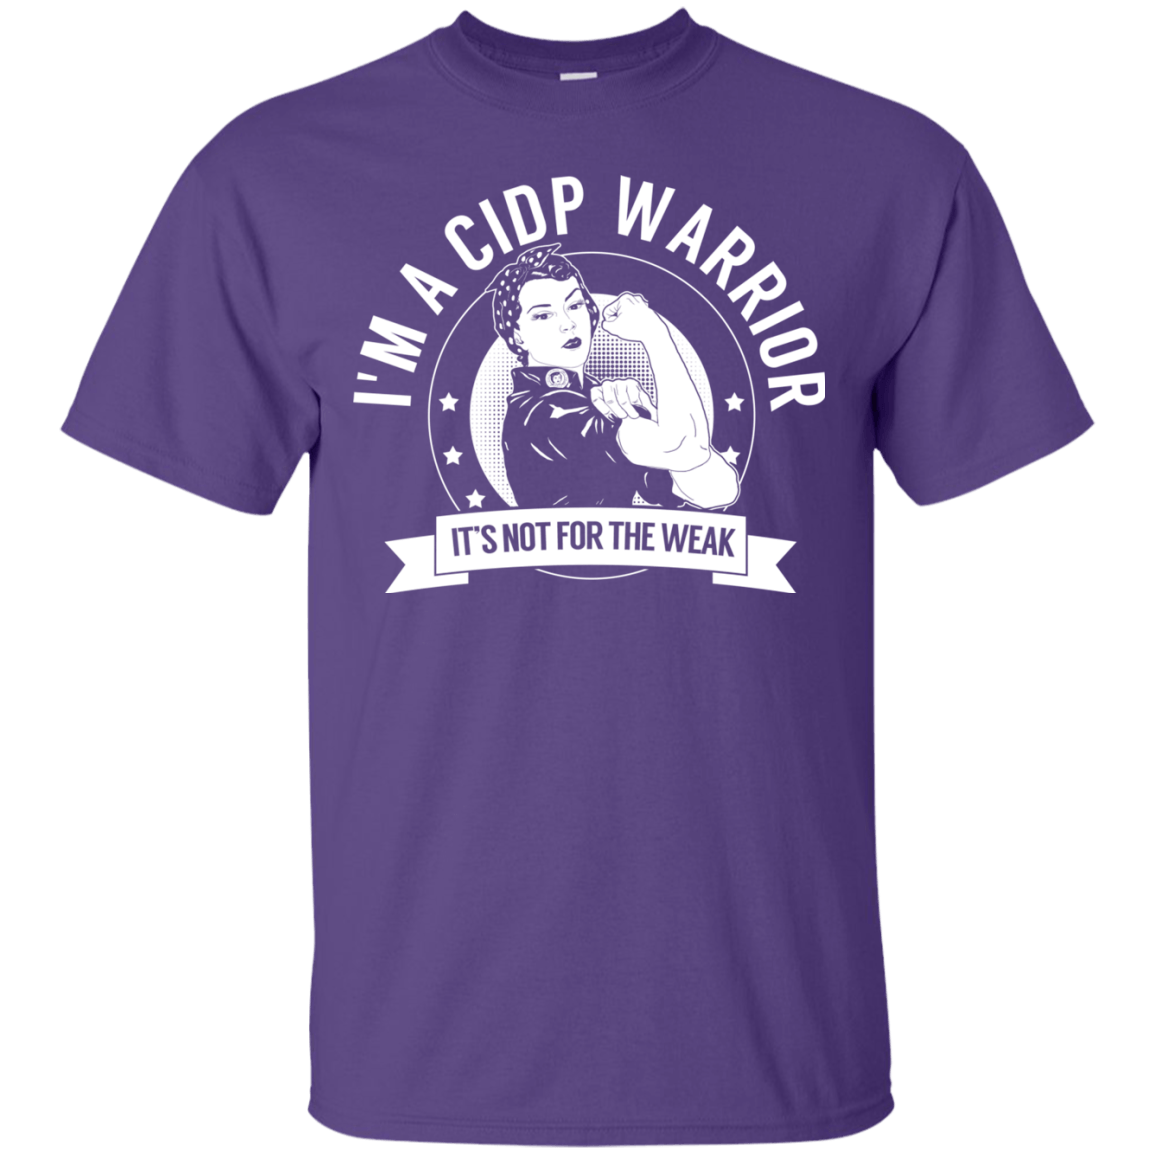 Chronic Inflammatory Demyelinating Polyneuropathy - CIDP Warrior NFTW Unisex Shirt - The Unchargeables